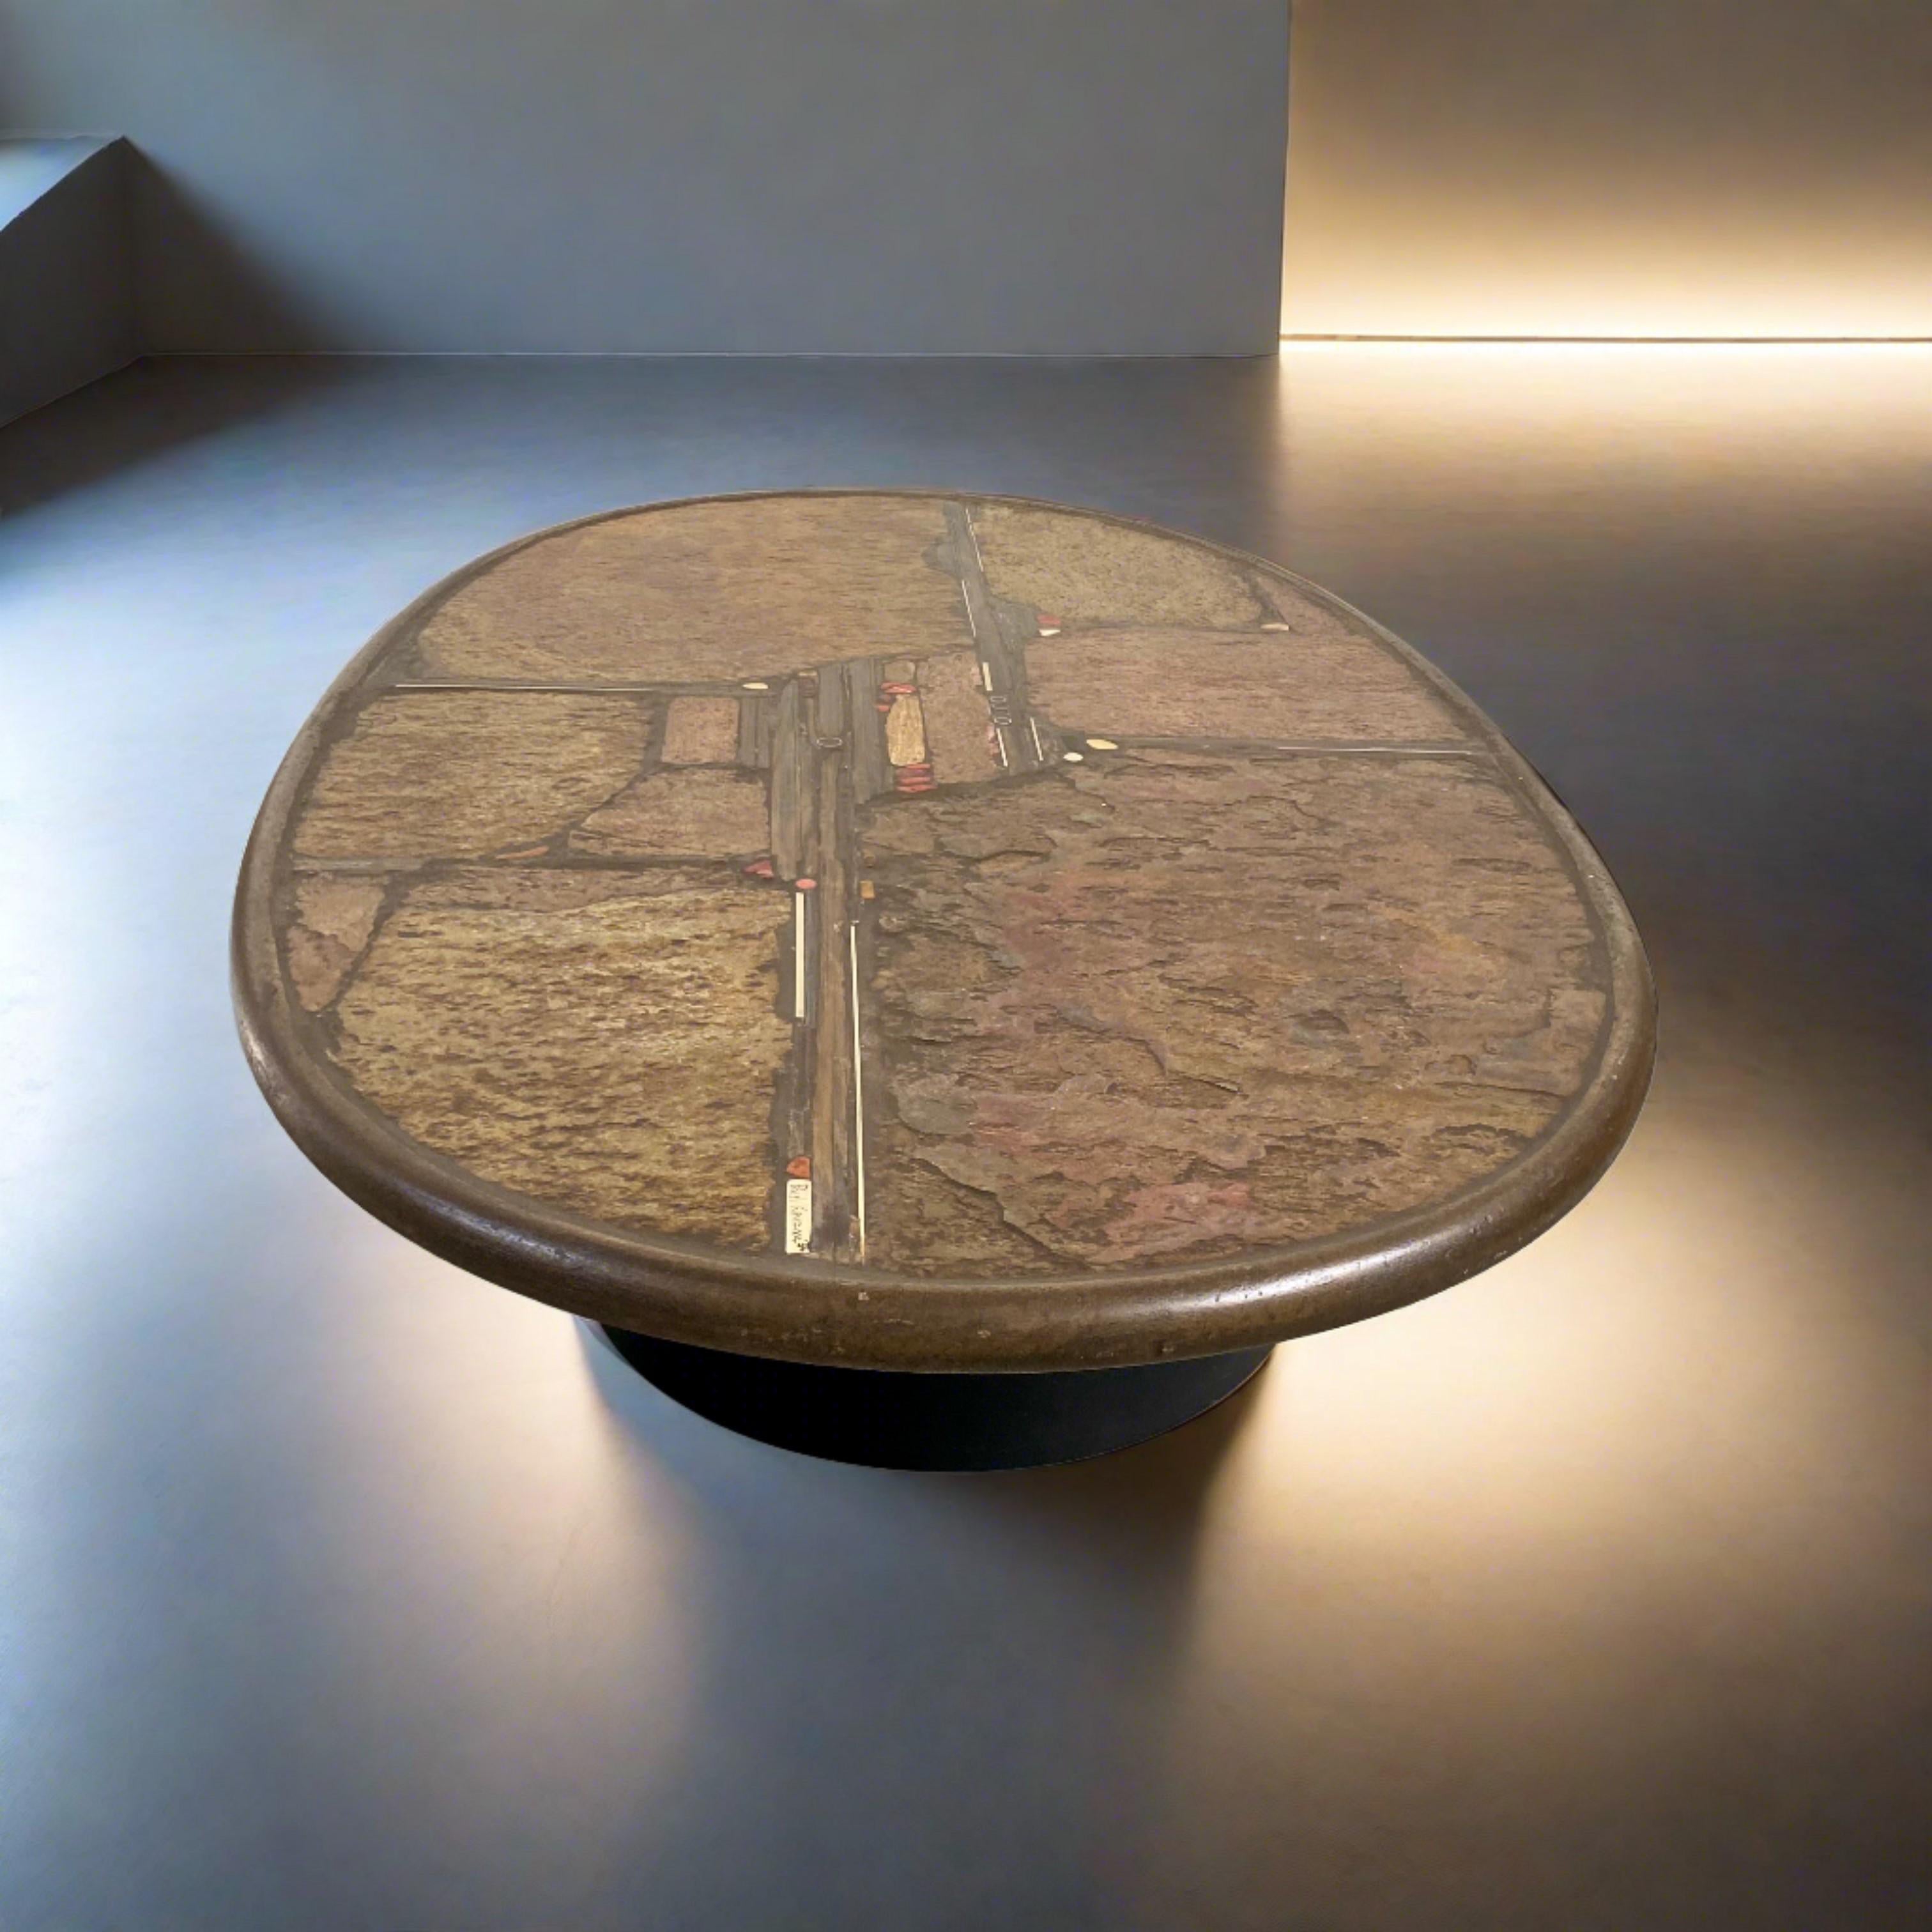 Late 20th Century Brutalist Oval Coffee Table by Sculptor Paul Kingma Dutch Design Netherlands For Sale